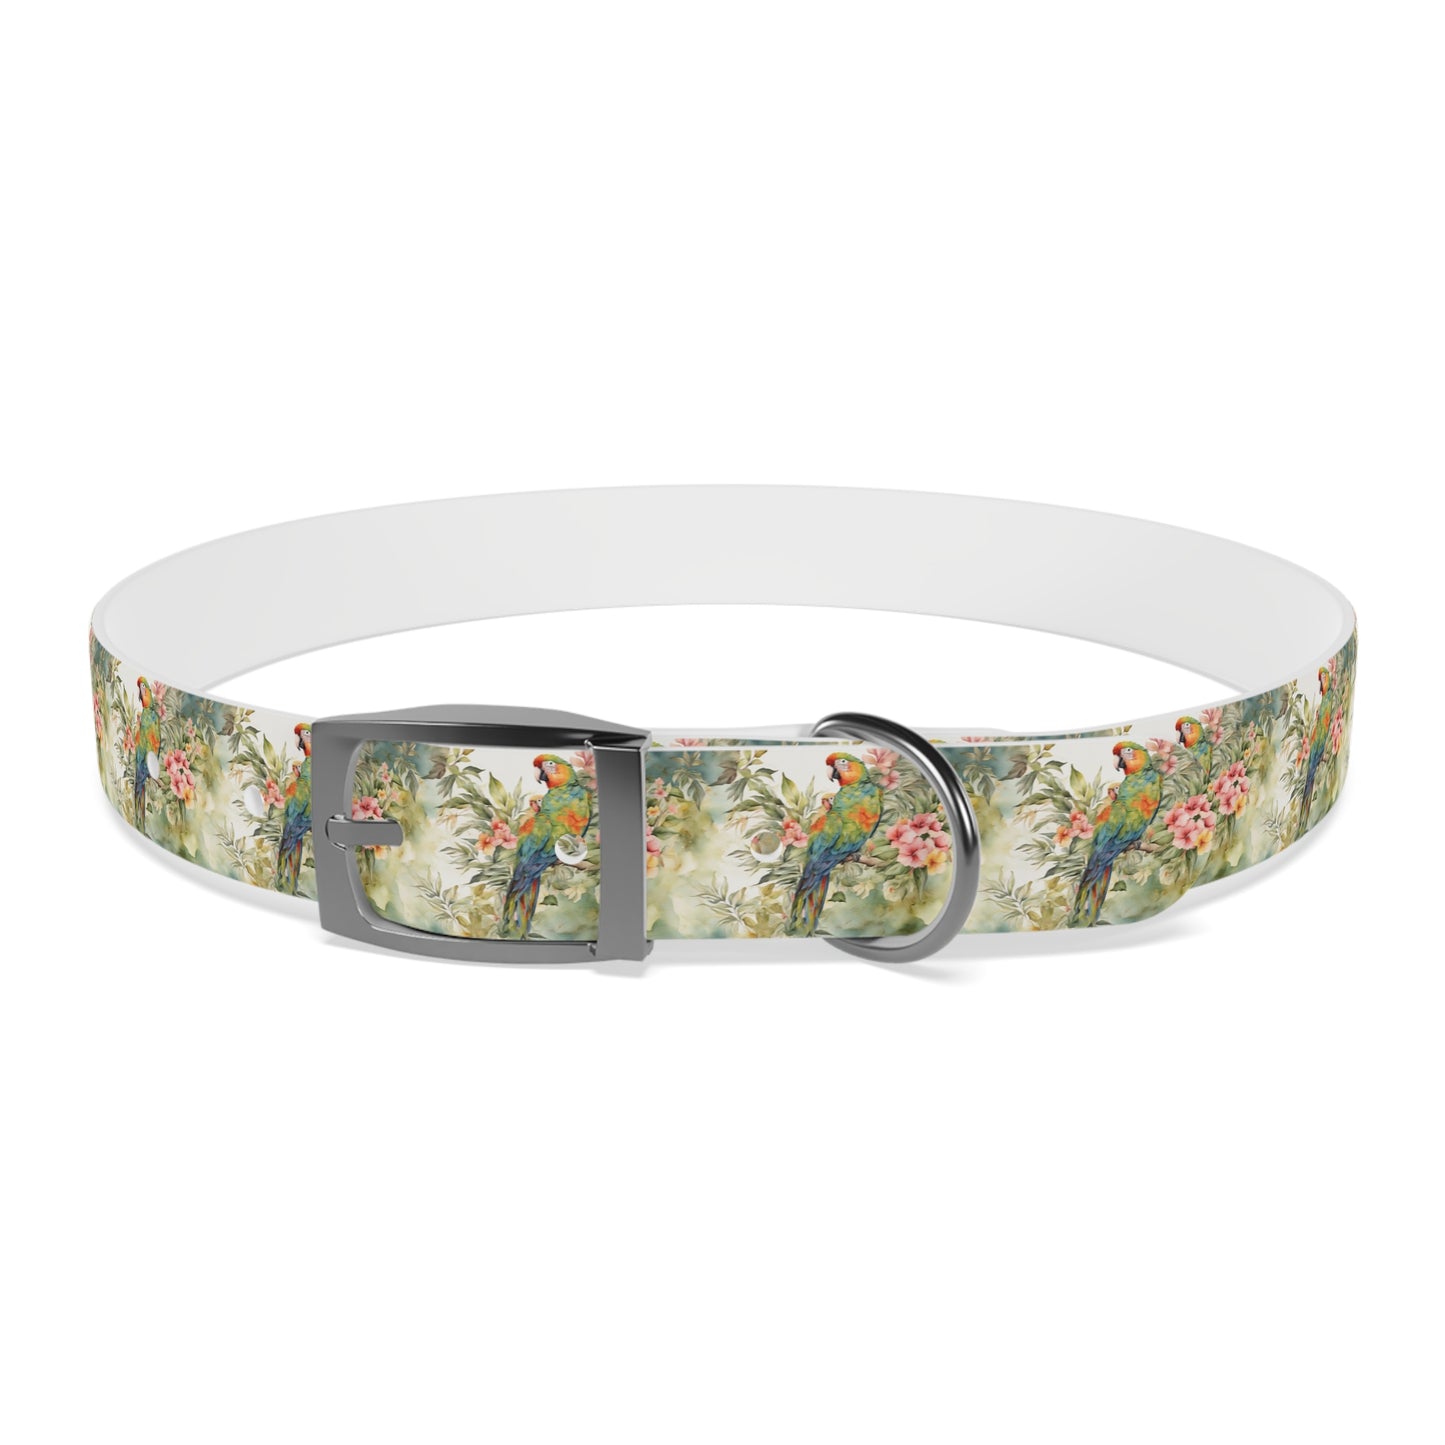 Parrot & Hibiscus Watercolor Pattern Dog Collar